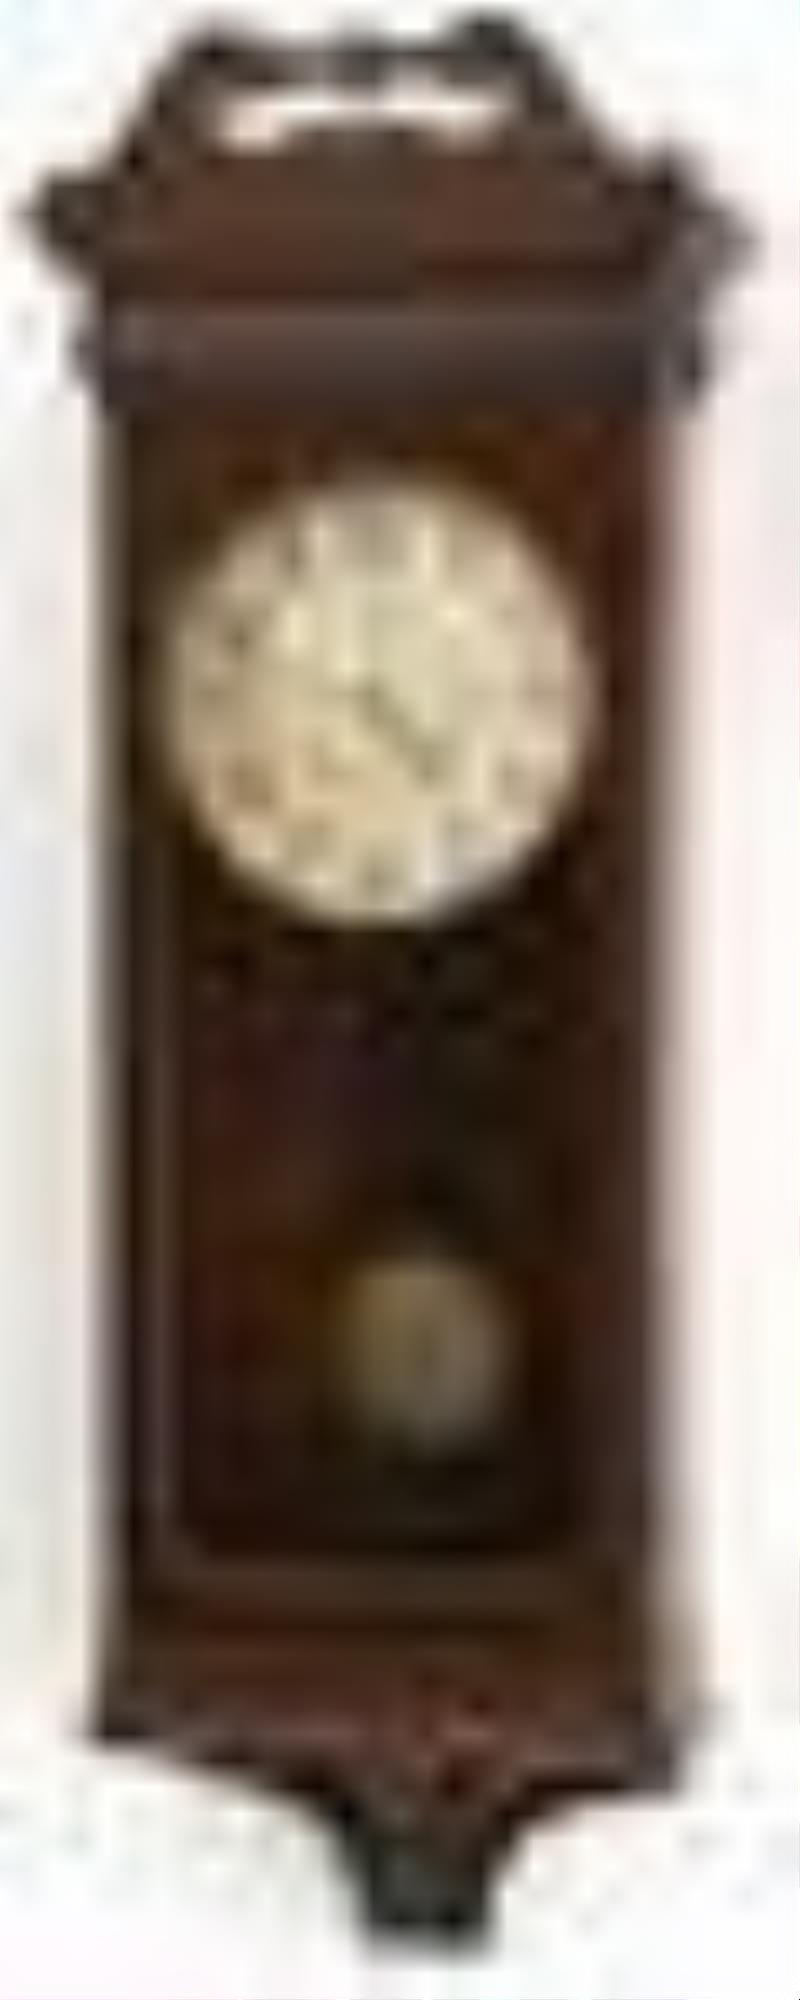 Automatic Electric Clock Co. Wall Clock